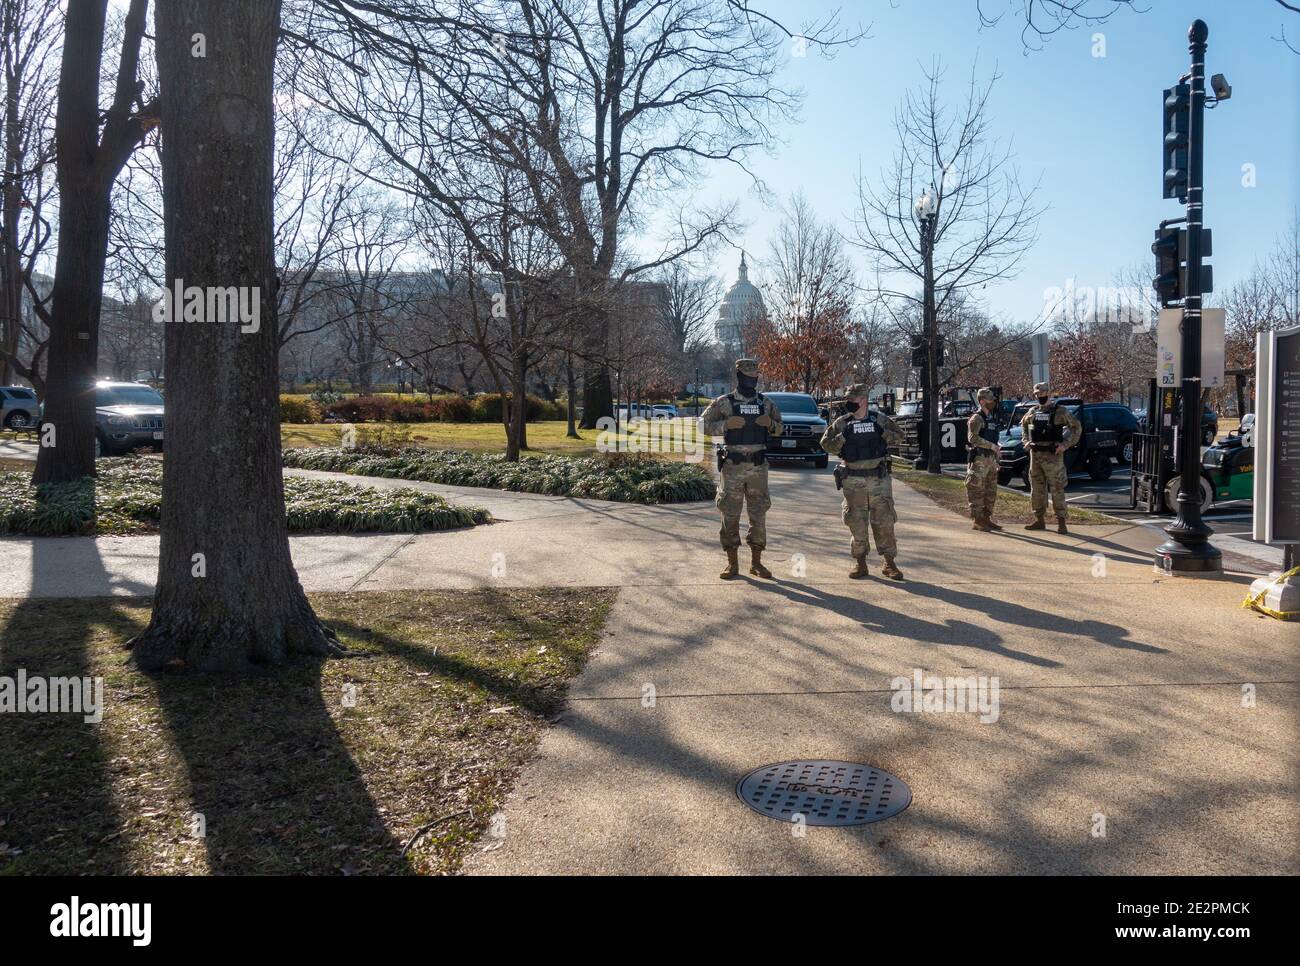 WASHINGTON, DC - JAN. 14, 2021: Two National Guard MPs stand watch at the U.S. Capitol as part of a show of force in preparation for anticipated pro-Trump extremist demonstrations and clashes, and Joe Biden's upcoming inauguration. Stock Photo